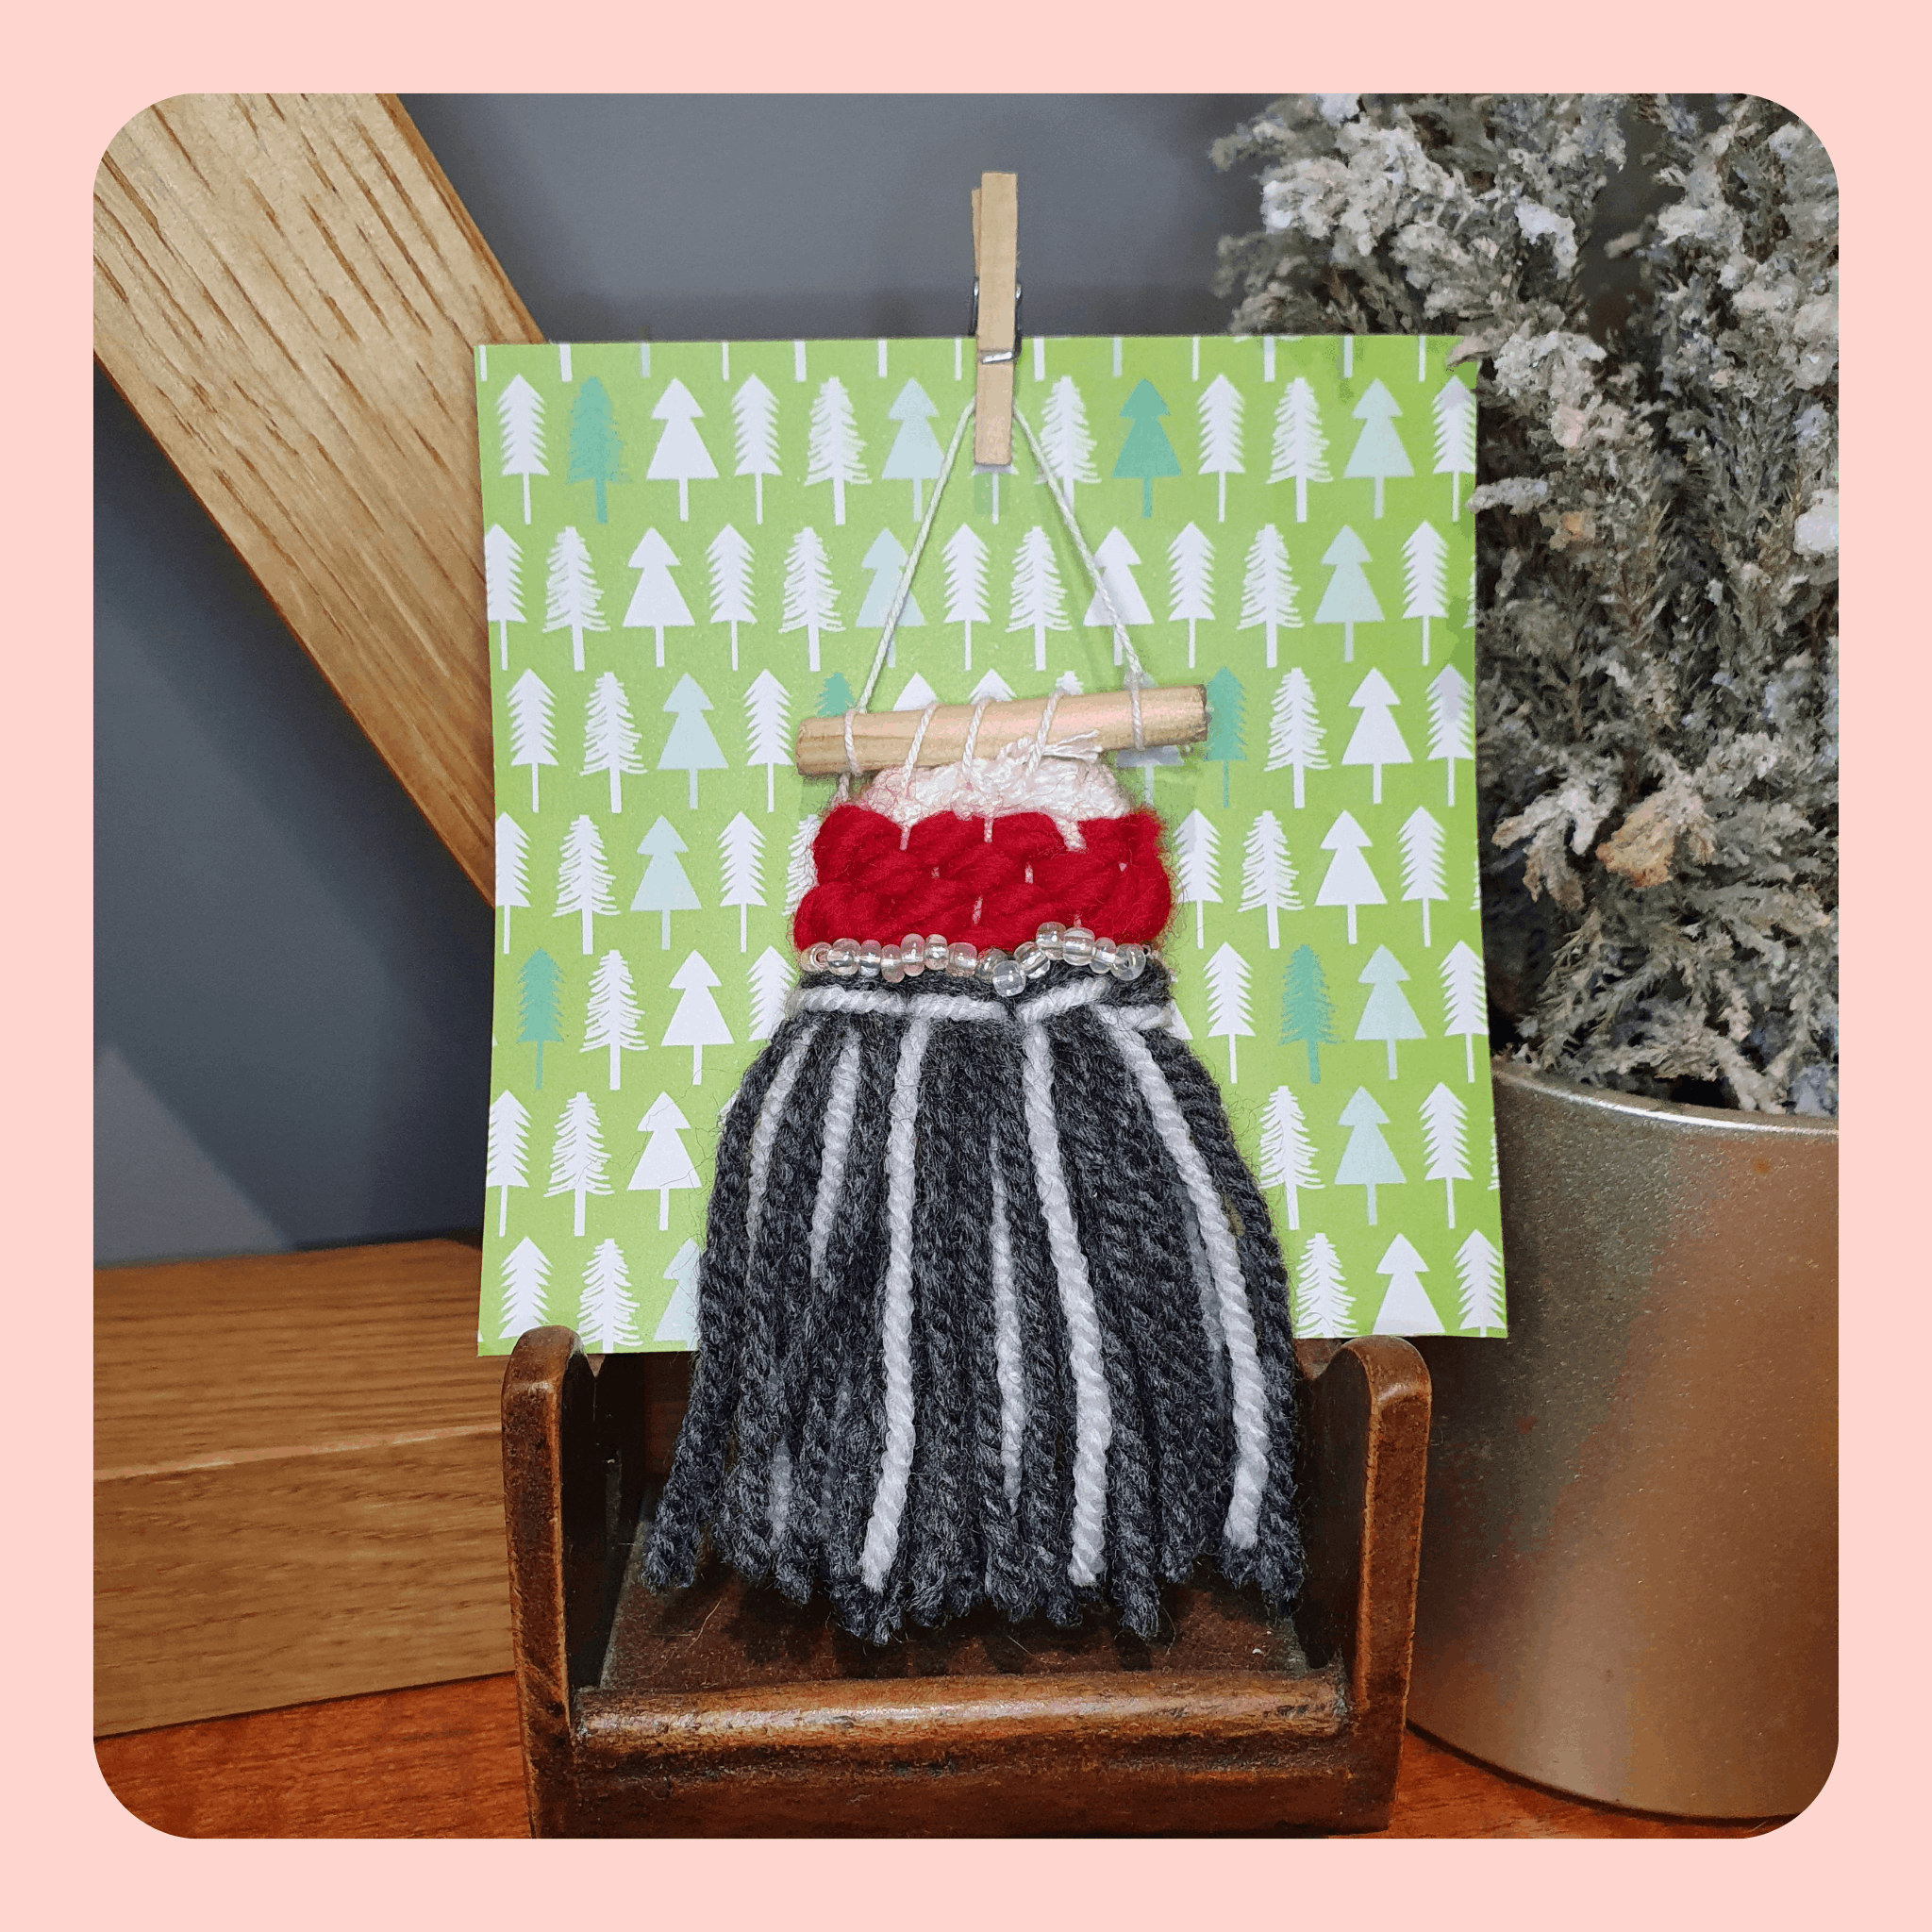 Mini Festive tree decoration. Red, white and grey weaving.